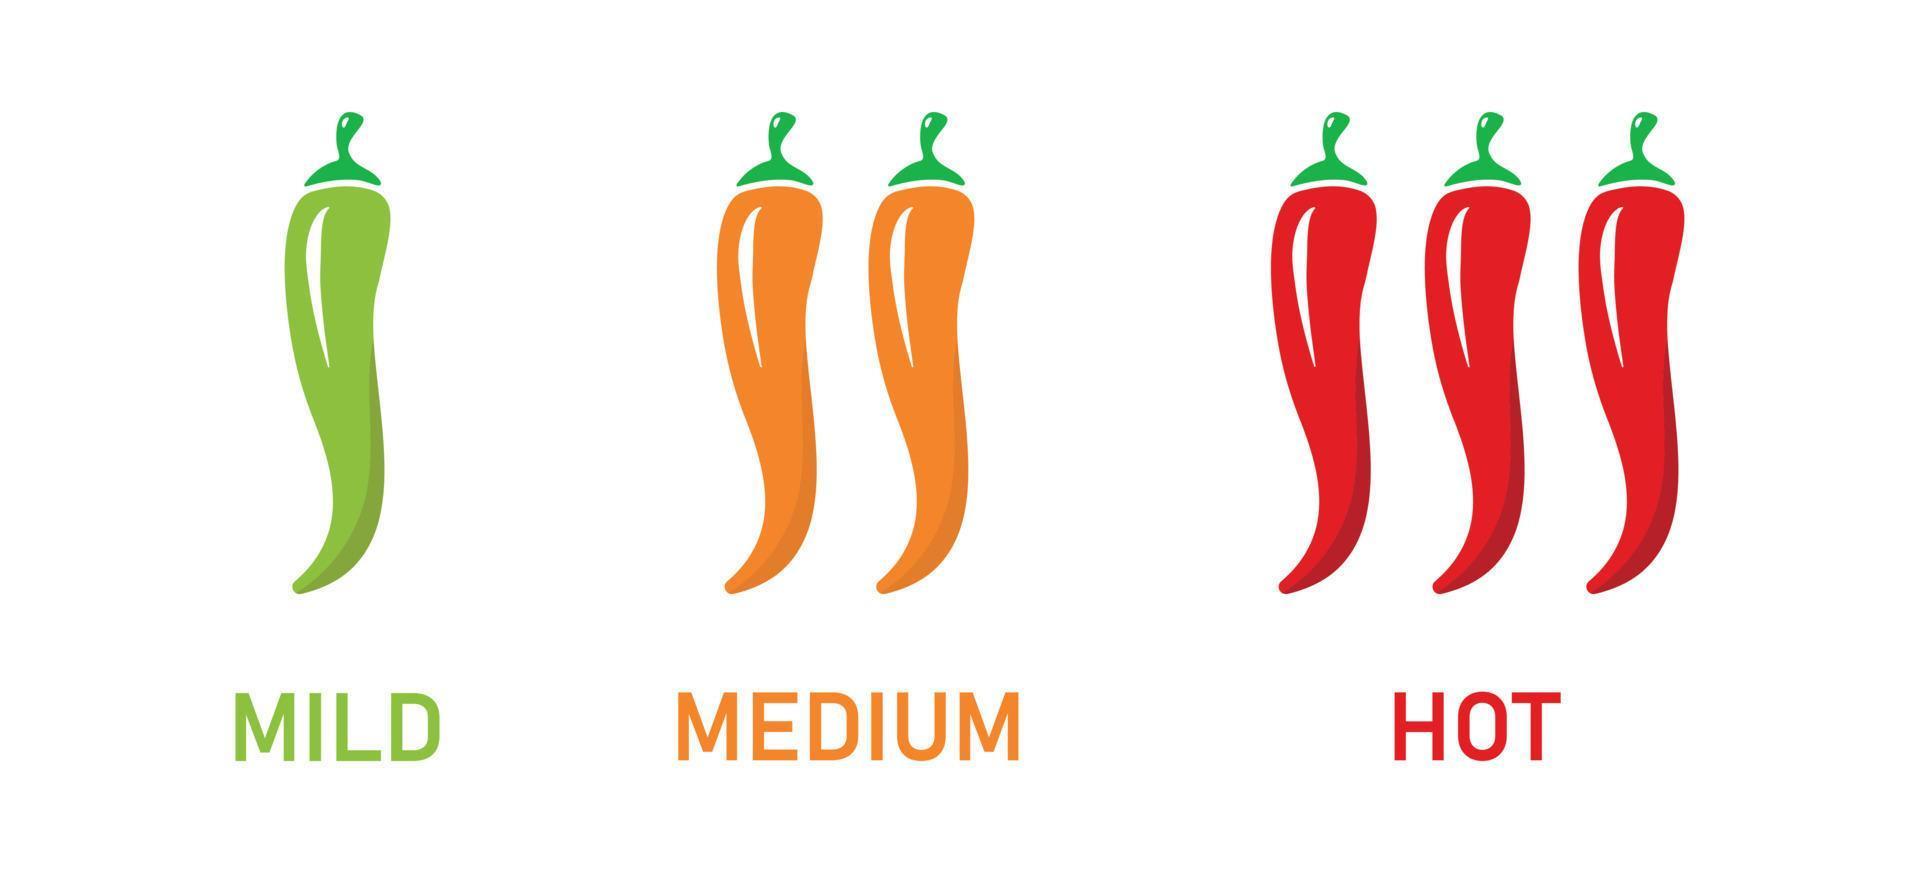 Spicy level Hot Chili Pepper icon set. Indicator fire strength scale. Vector illustration on white background